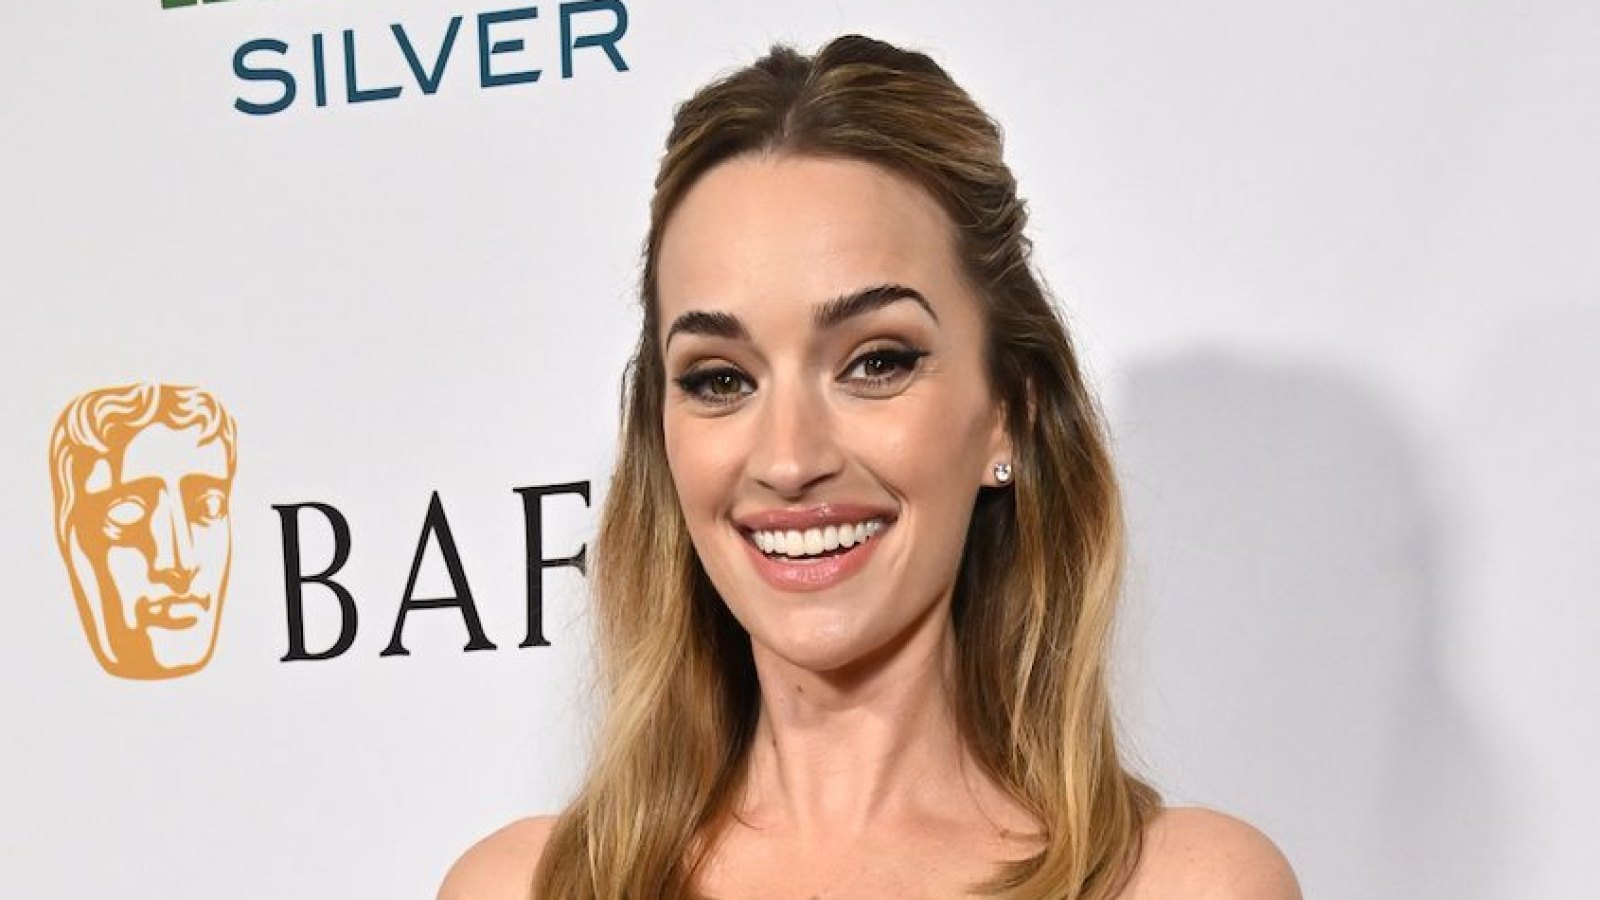 Brianne howey things you dont know about me